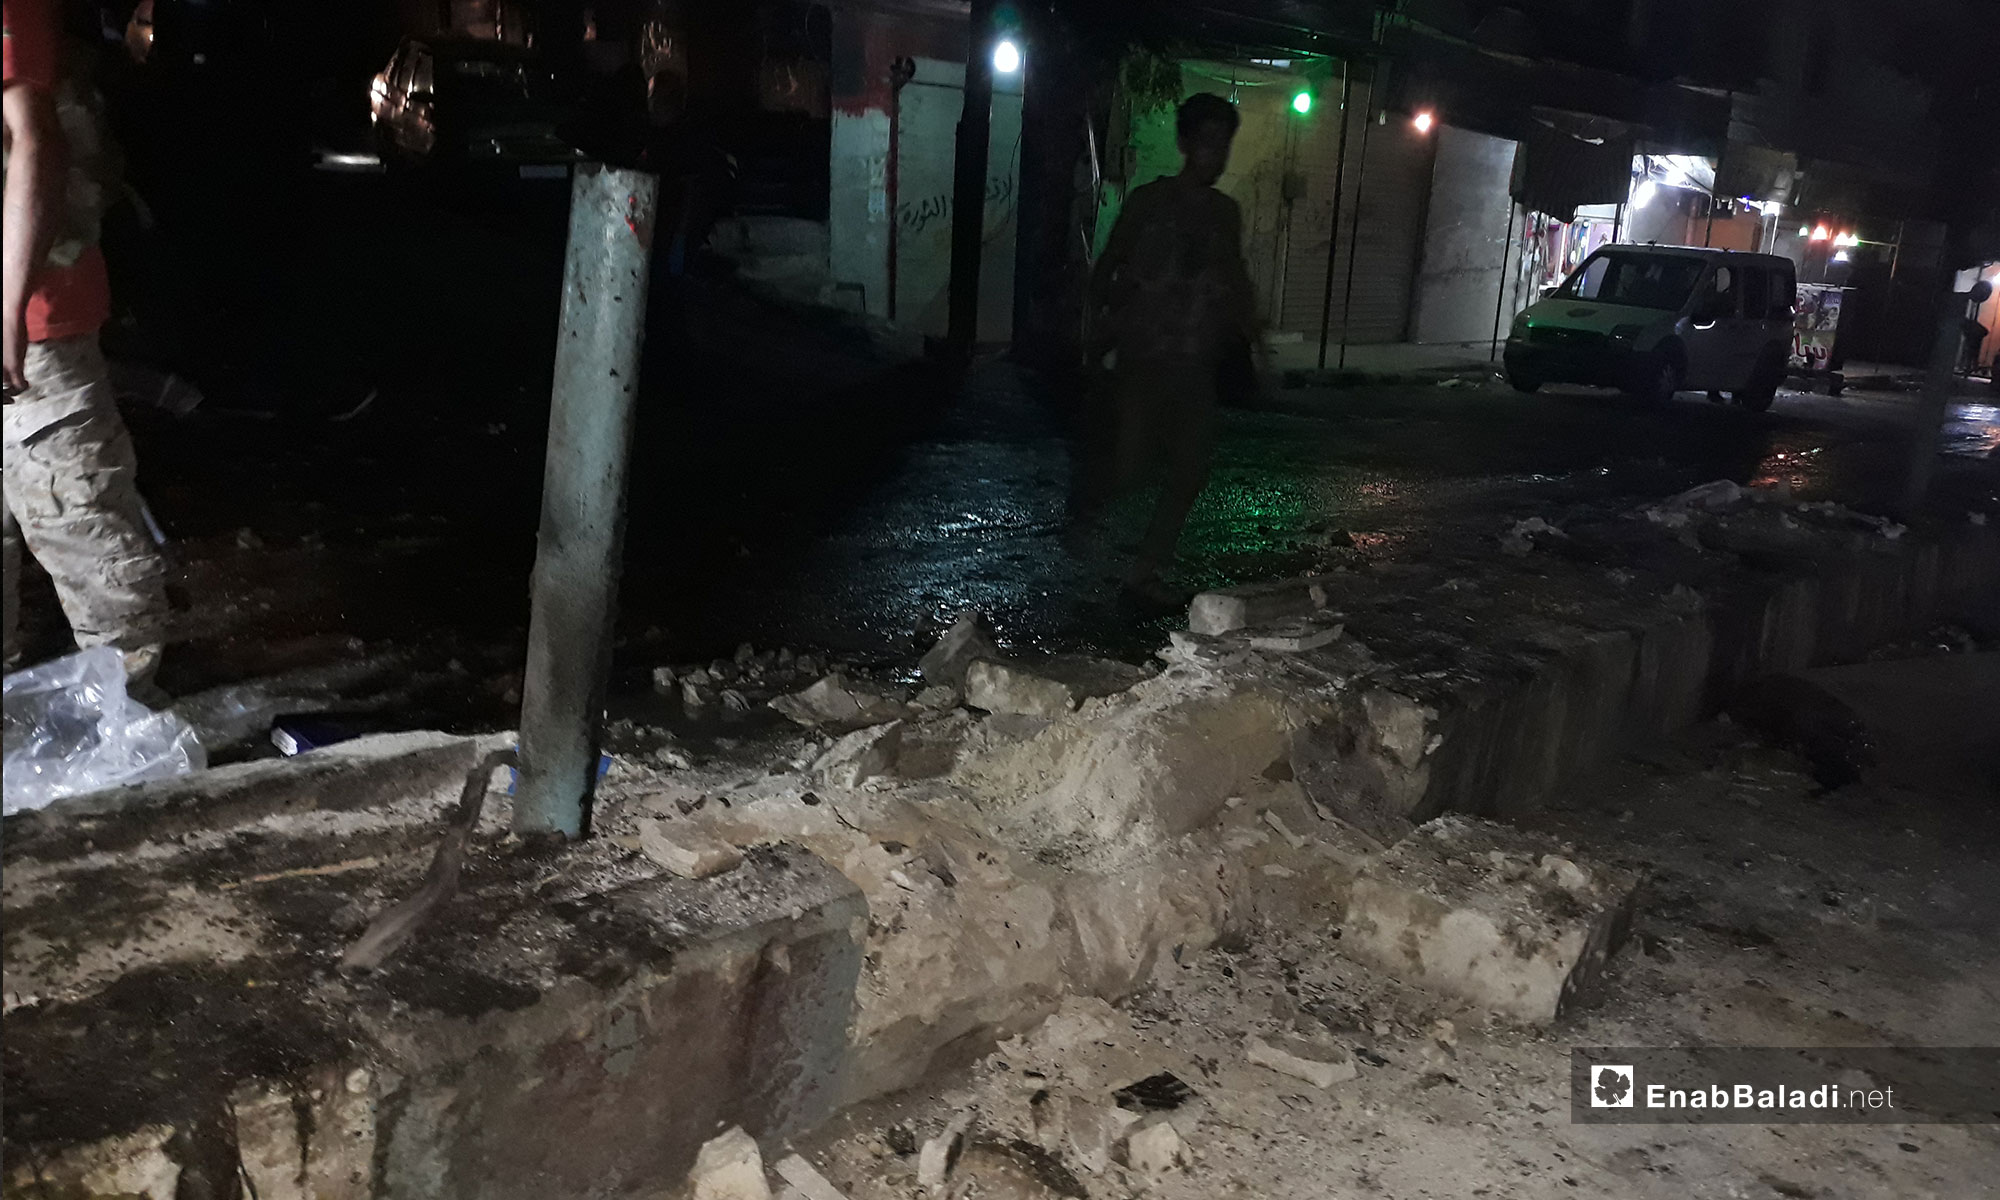 Destruction caused by an explosive device in the city of Afrin – August 29, 2018 (Enab Baladi)